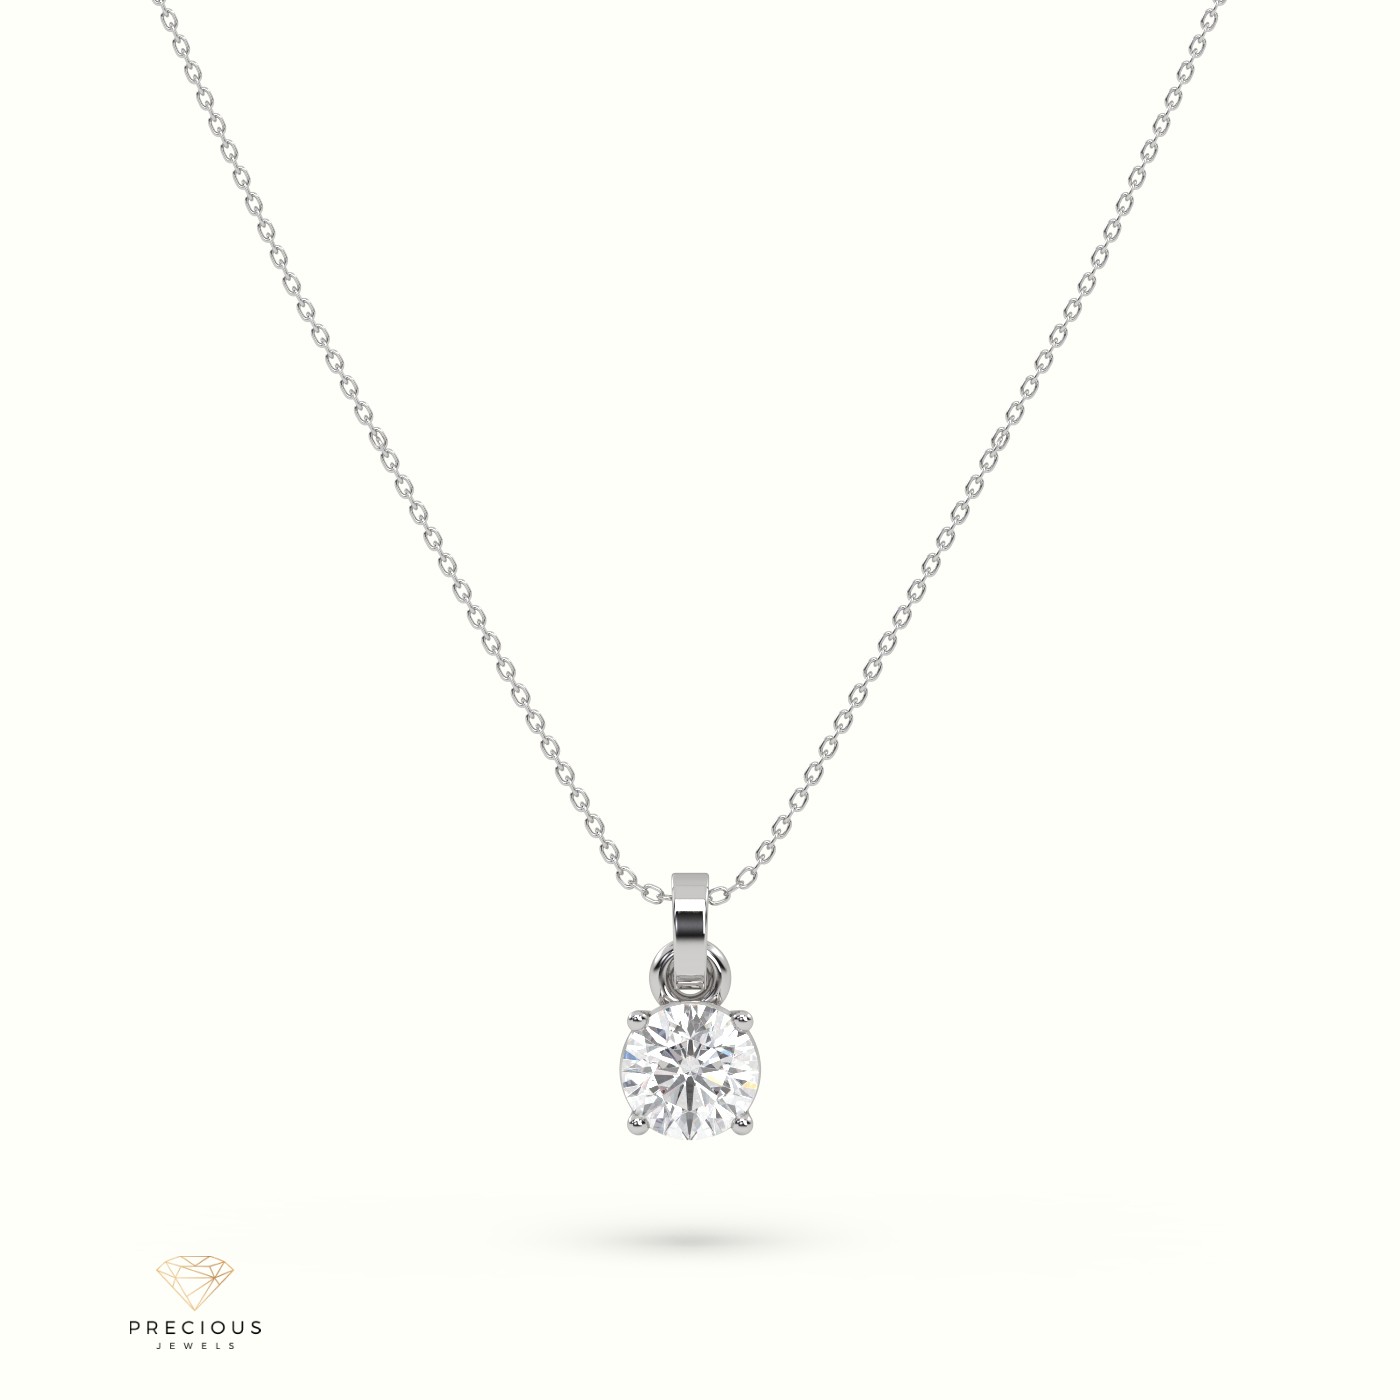 18k white gold certified diamond solitair pendant 0.30 ct to 1.50 ct si1 quality g color round 4 prongs